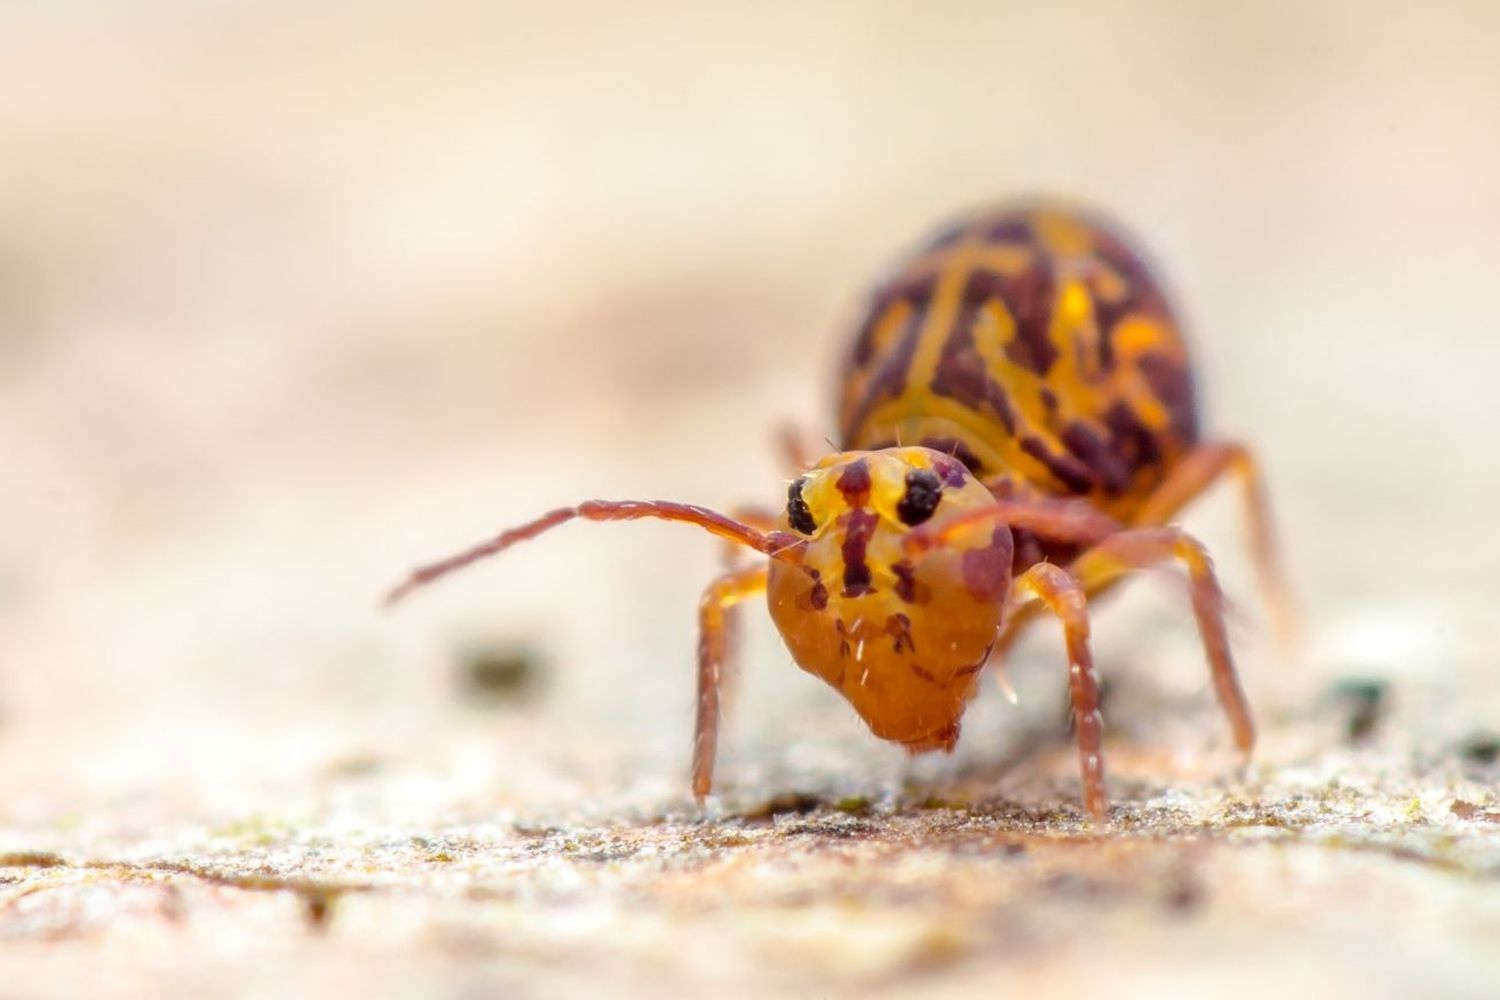 How to get rid of springtail bugs from your house – top tips from pest control experts